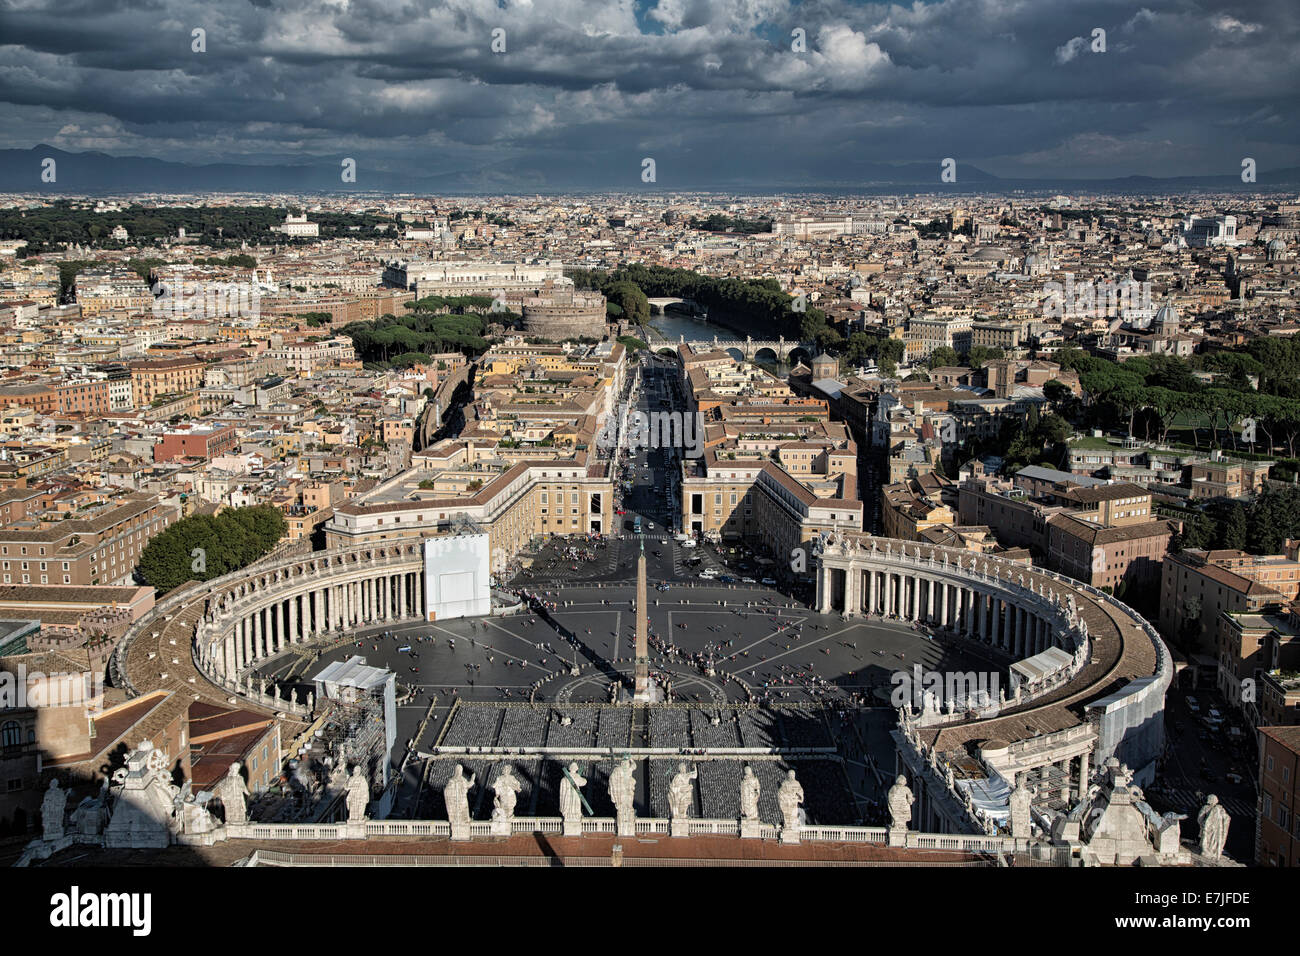 View, basilica, Conciliazione, cathedral, dome, capital, Italy, Europe, dome, Saint Peter, cathedral, Piazza, Vatican Stock Photo